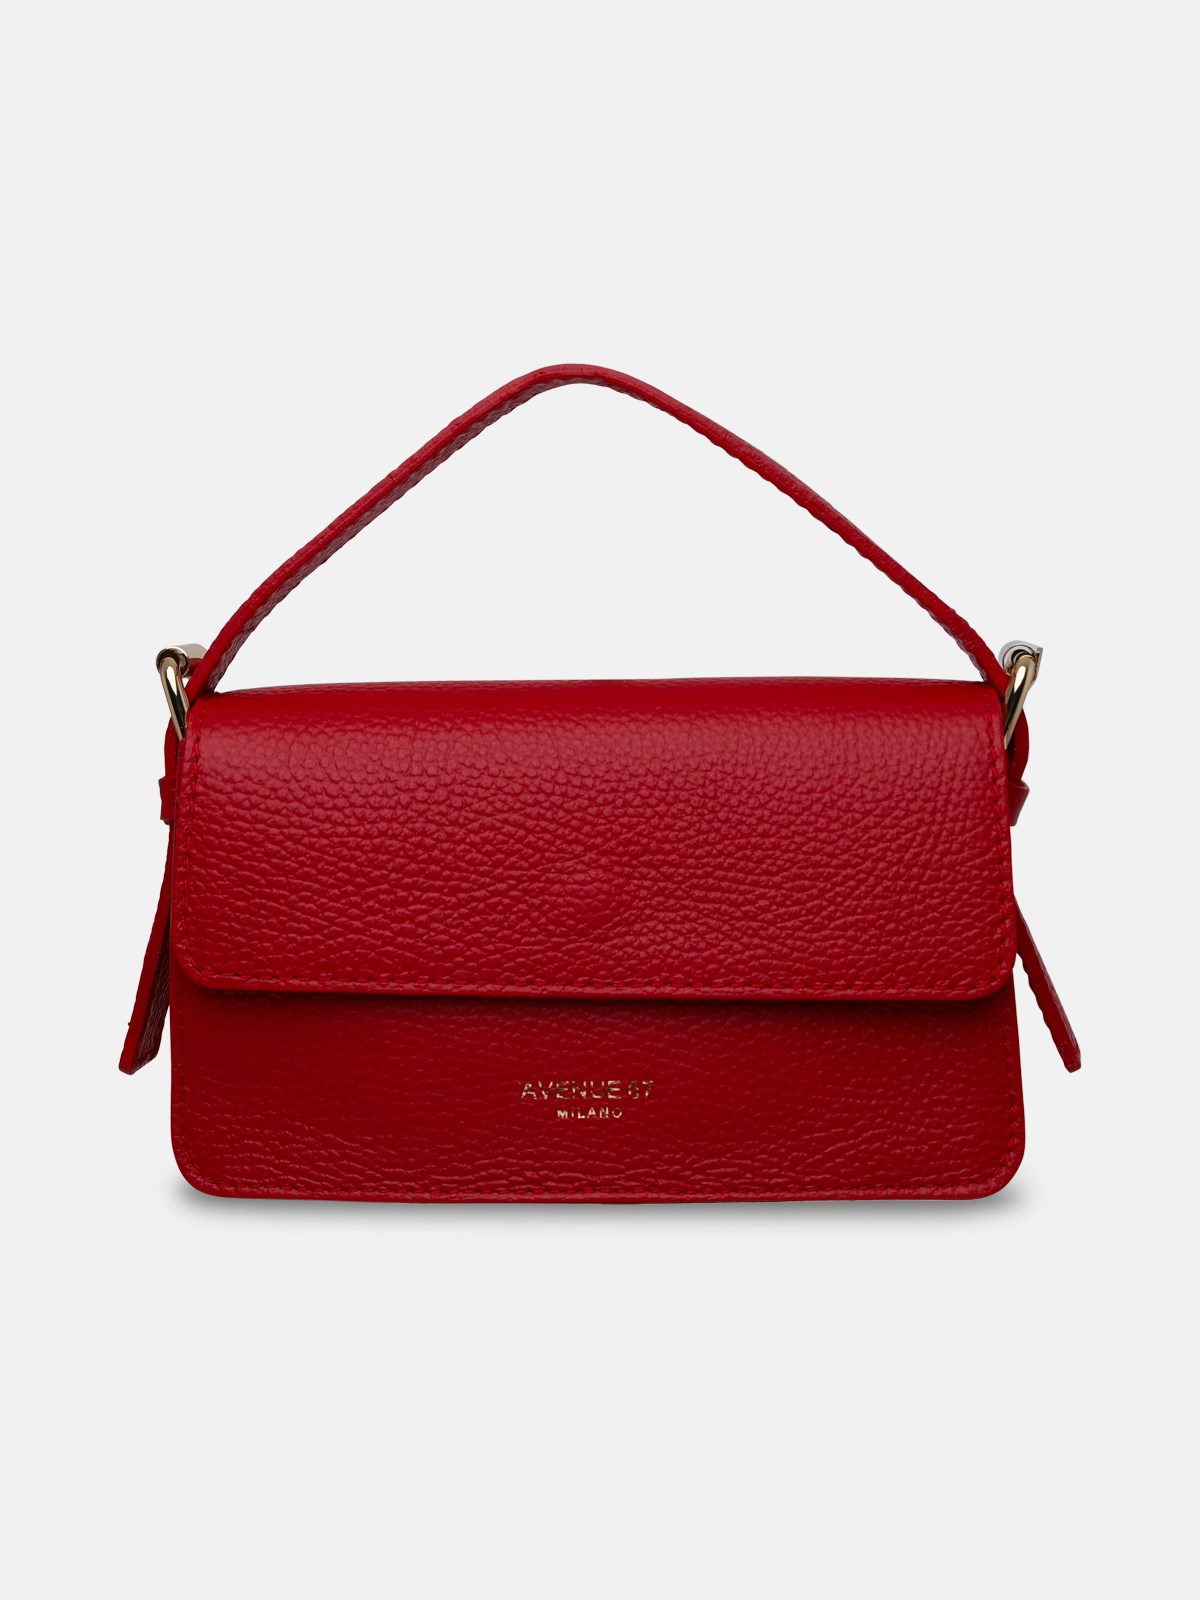 Avenue 67 Red Leather Cashmere Bag